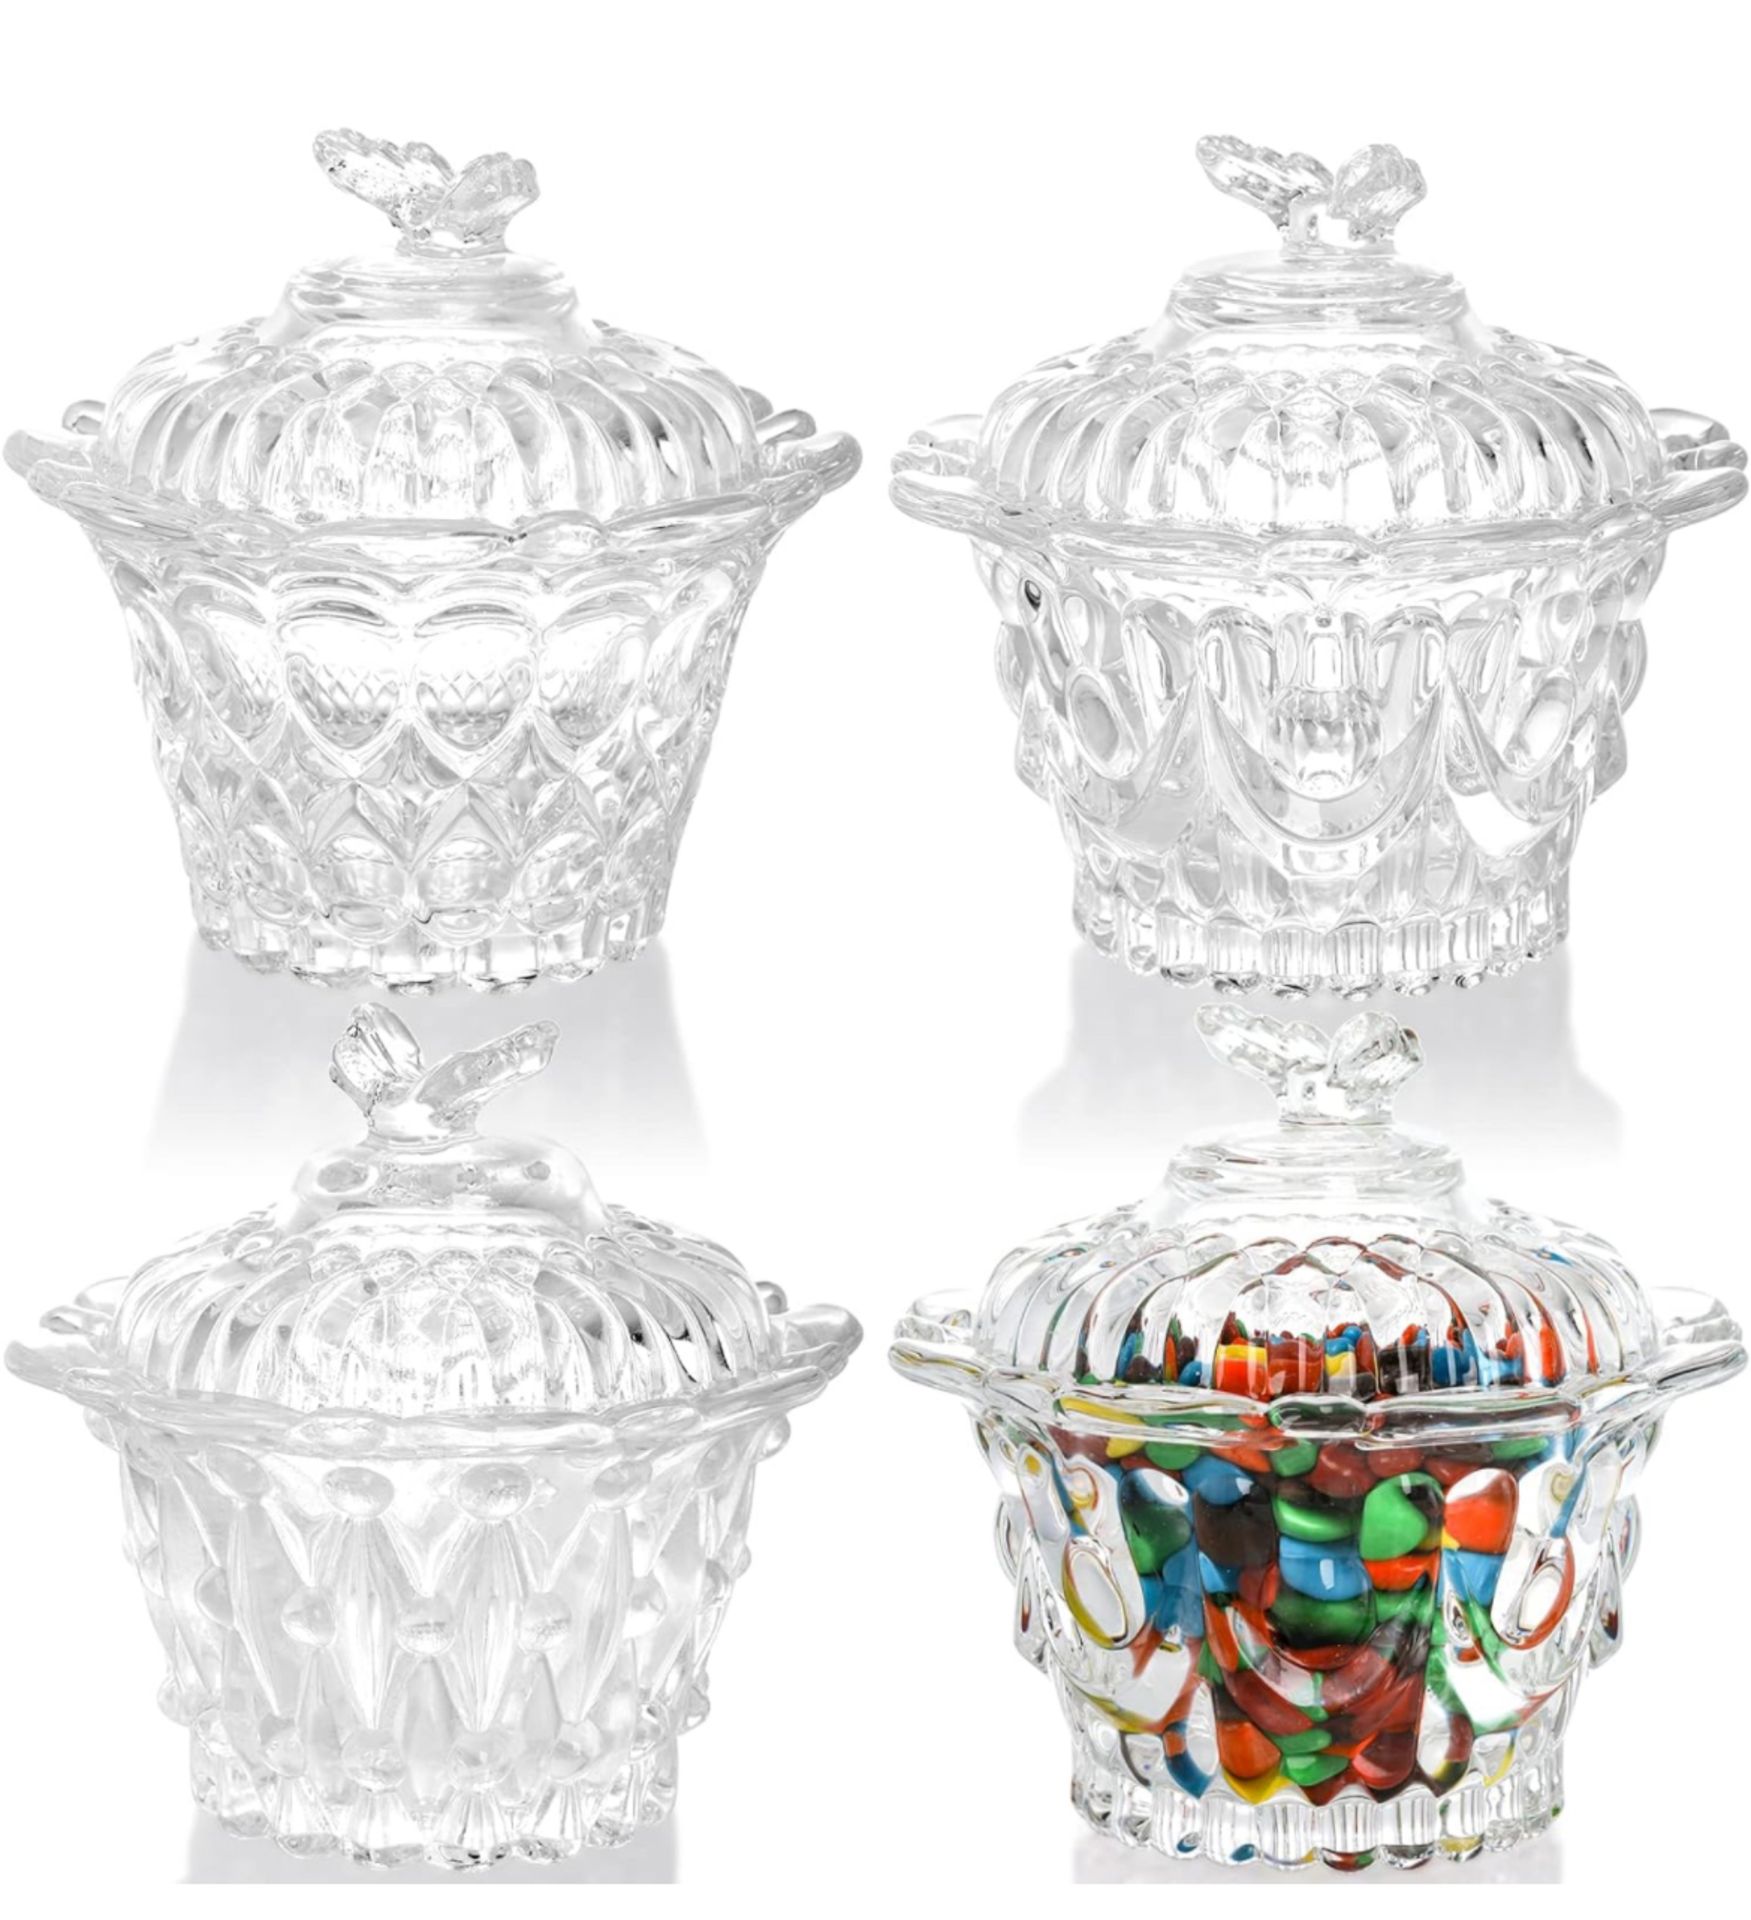 2 x Sets of 4 Candy Dishes with Lids